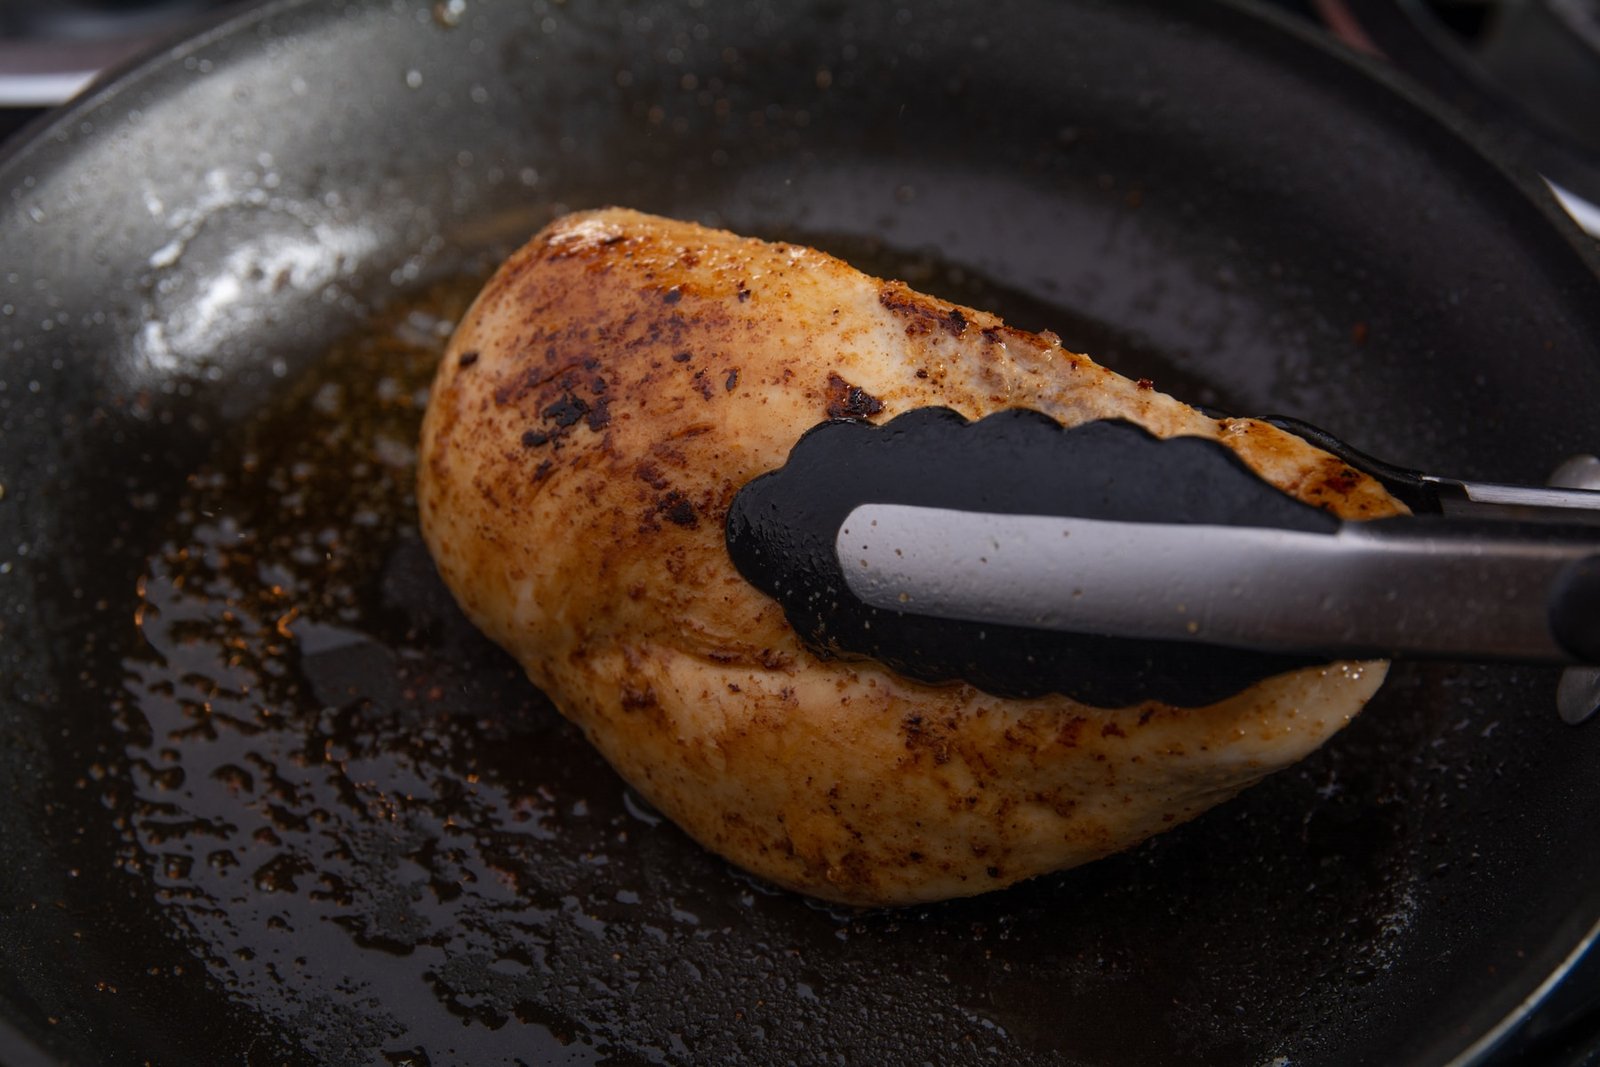 Tongs holding a chicken breast on its side in a pan.